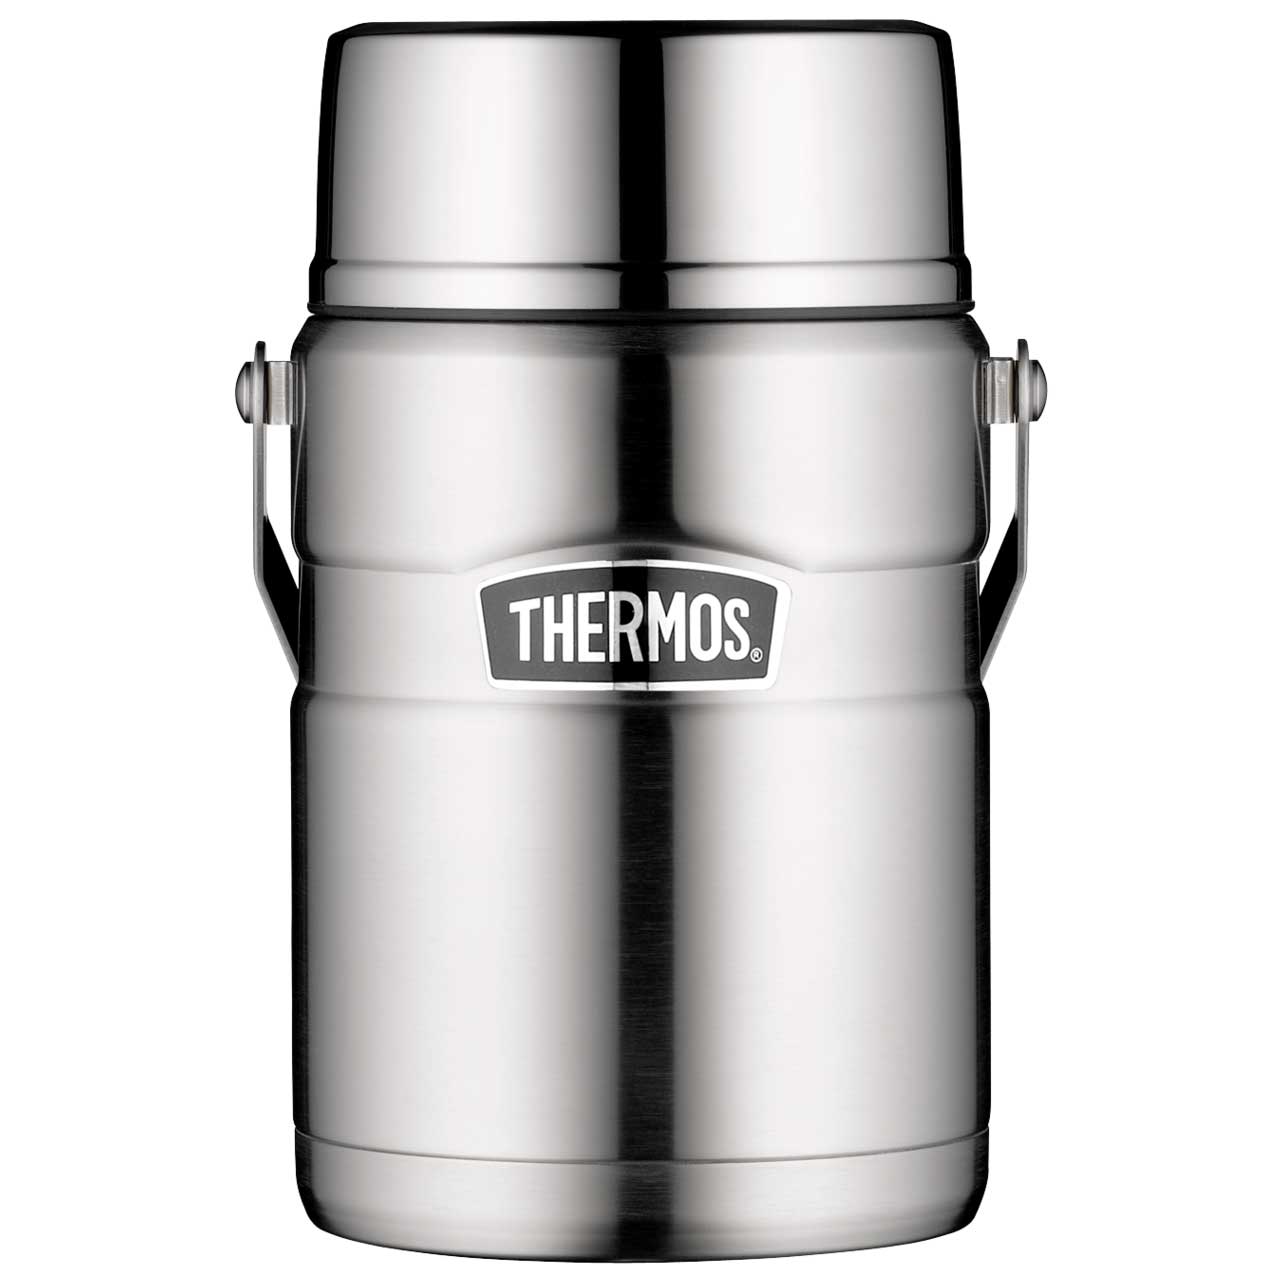 Productfoto van THERMOS® Stainless King Insulated Food Jar 1.2L - stainless steel mat